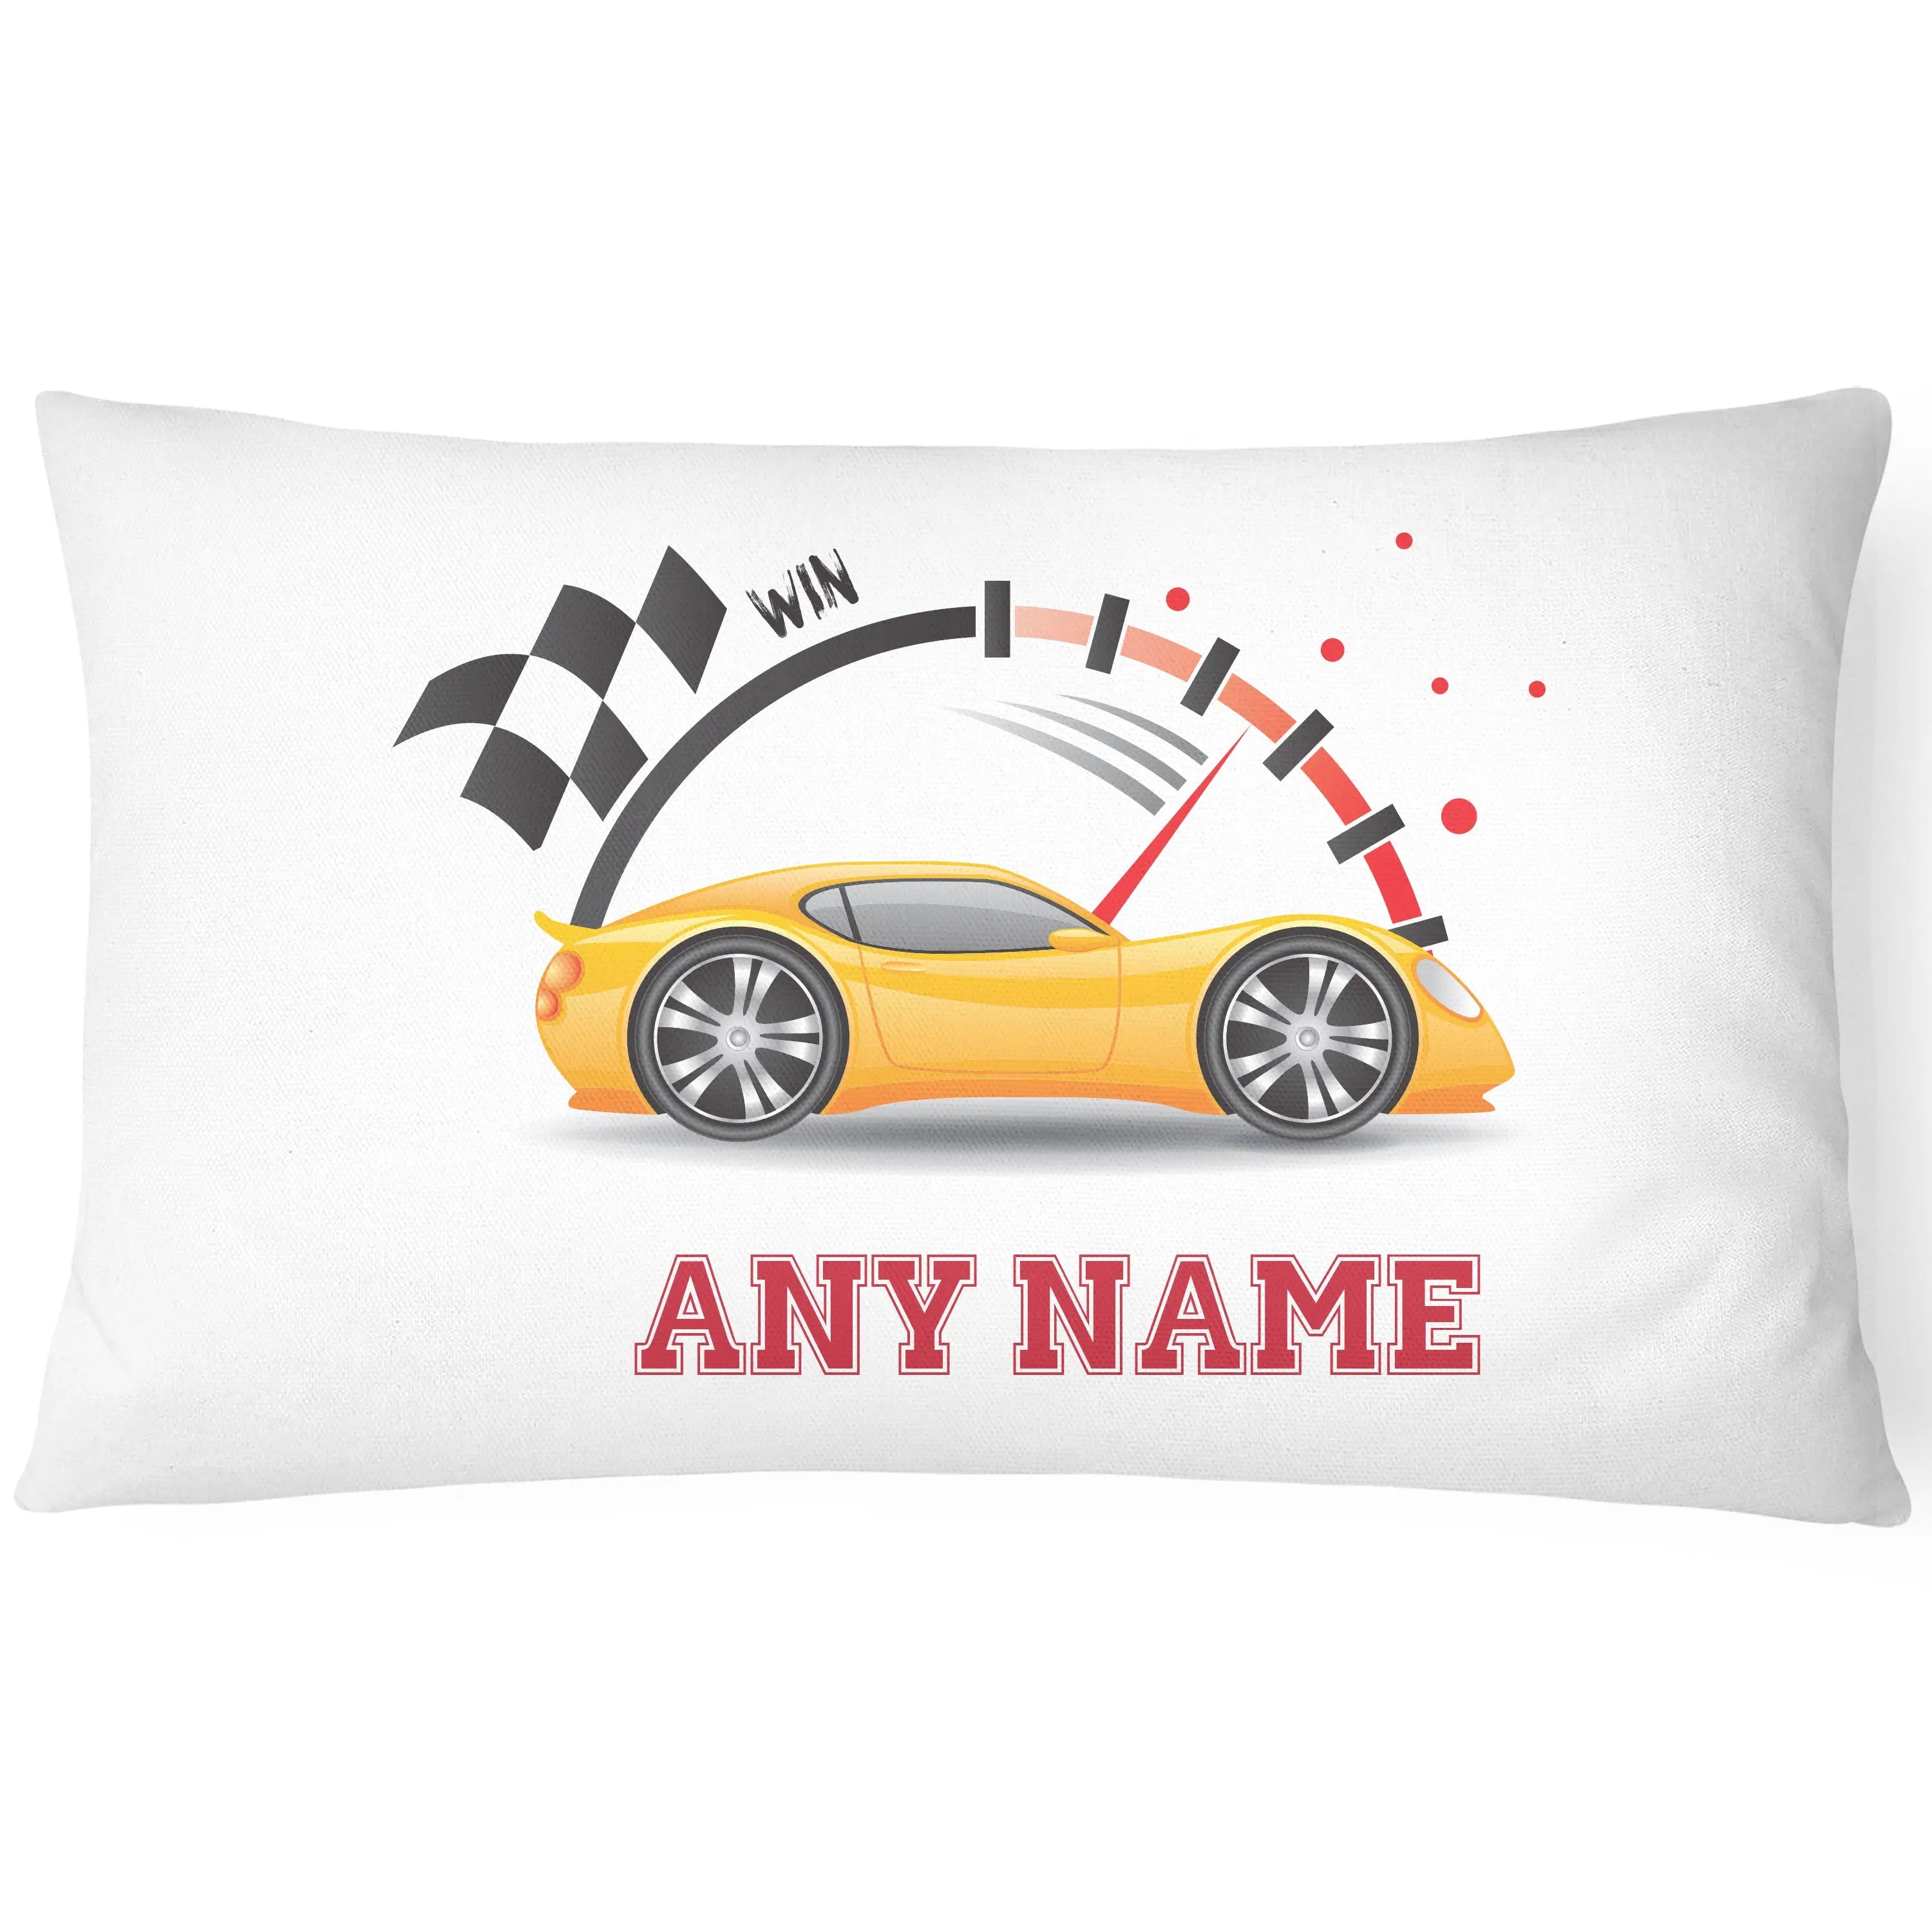 Race Car Pillowcase for Kids - Personalise With Any Name - Perfect Children's Gift - Sunny